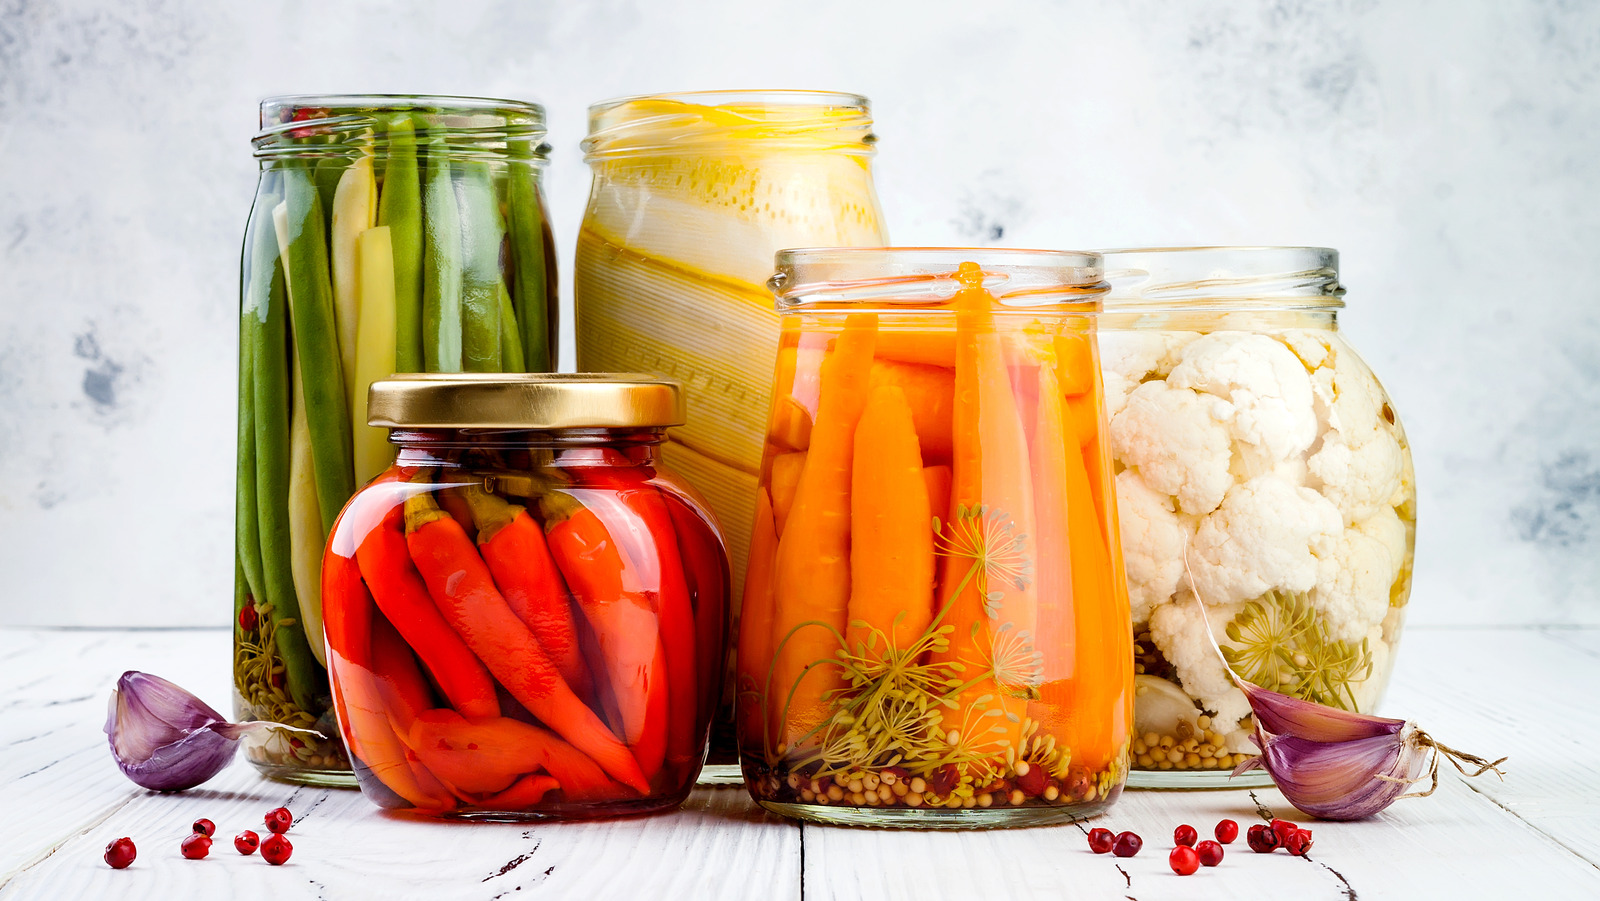 Food Preservation Websites to Help You Prolong a Bountiful Harvest